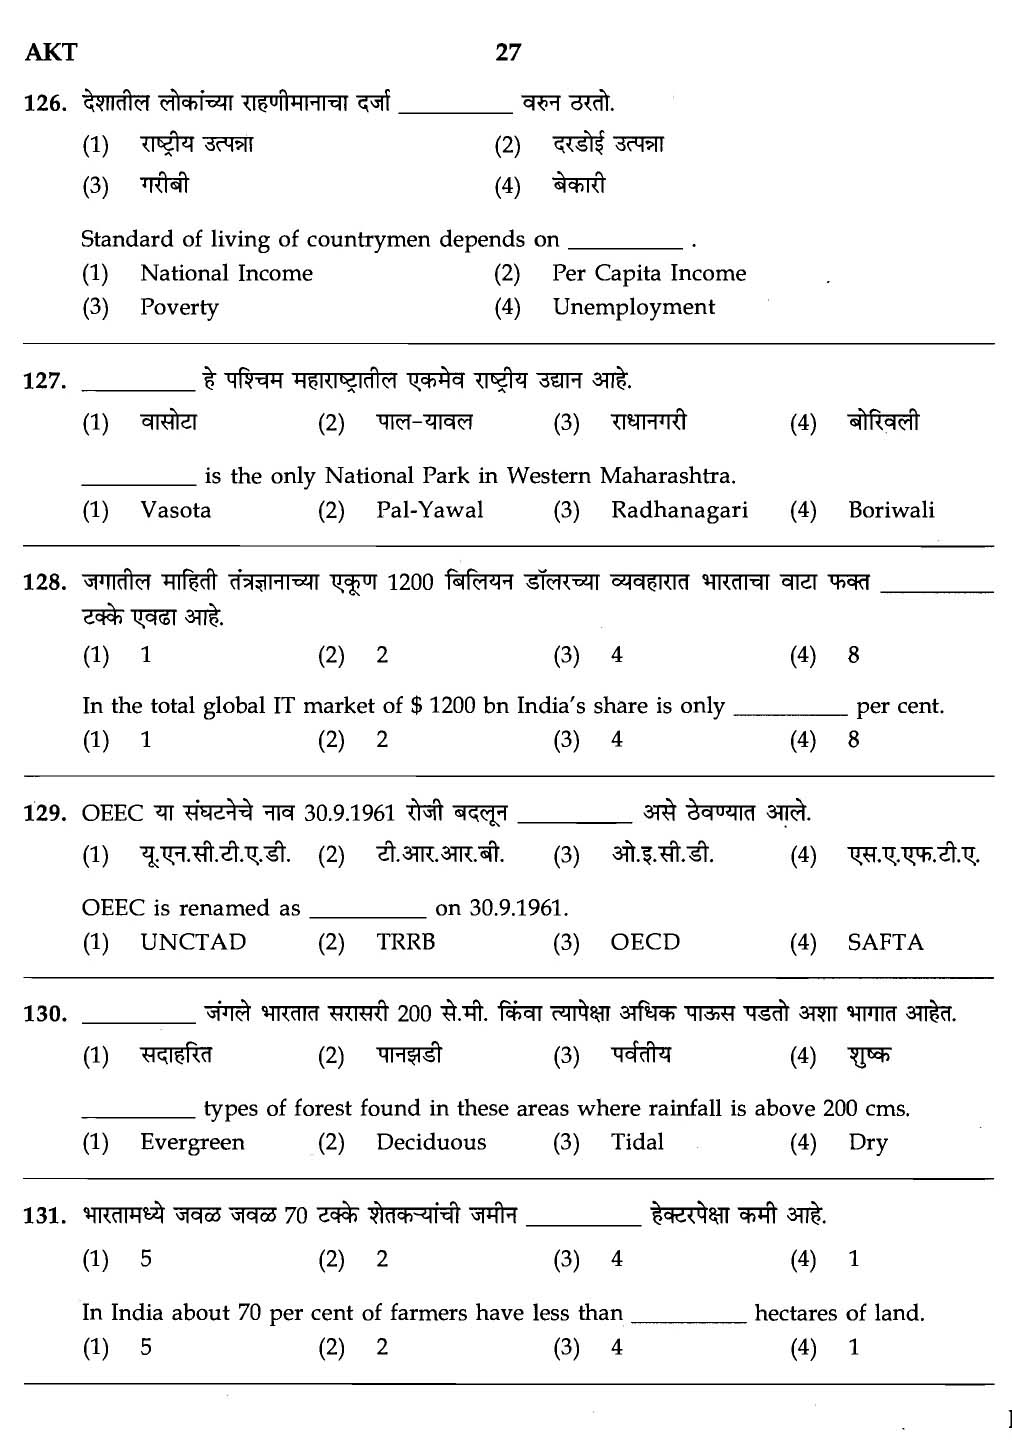 MPSC Agricultural Services Exam 2007 General Question Paper 25